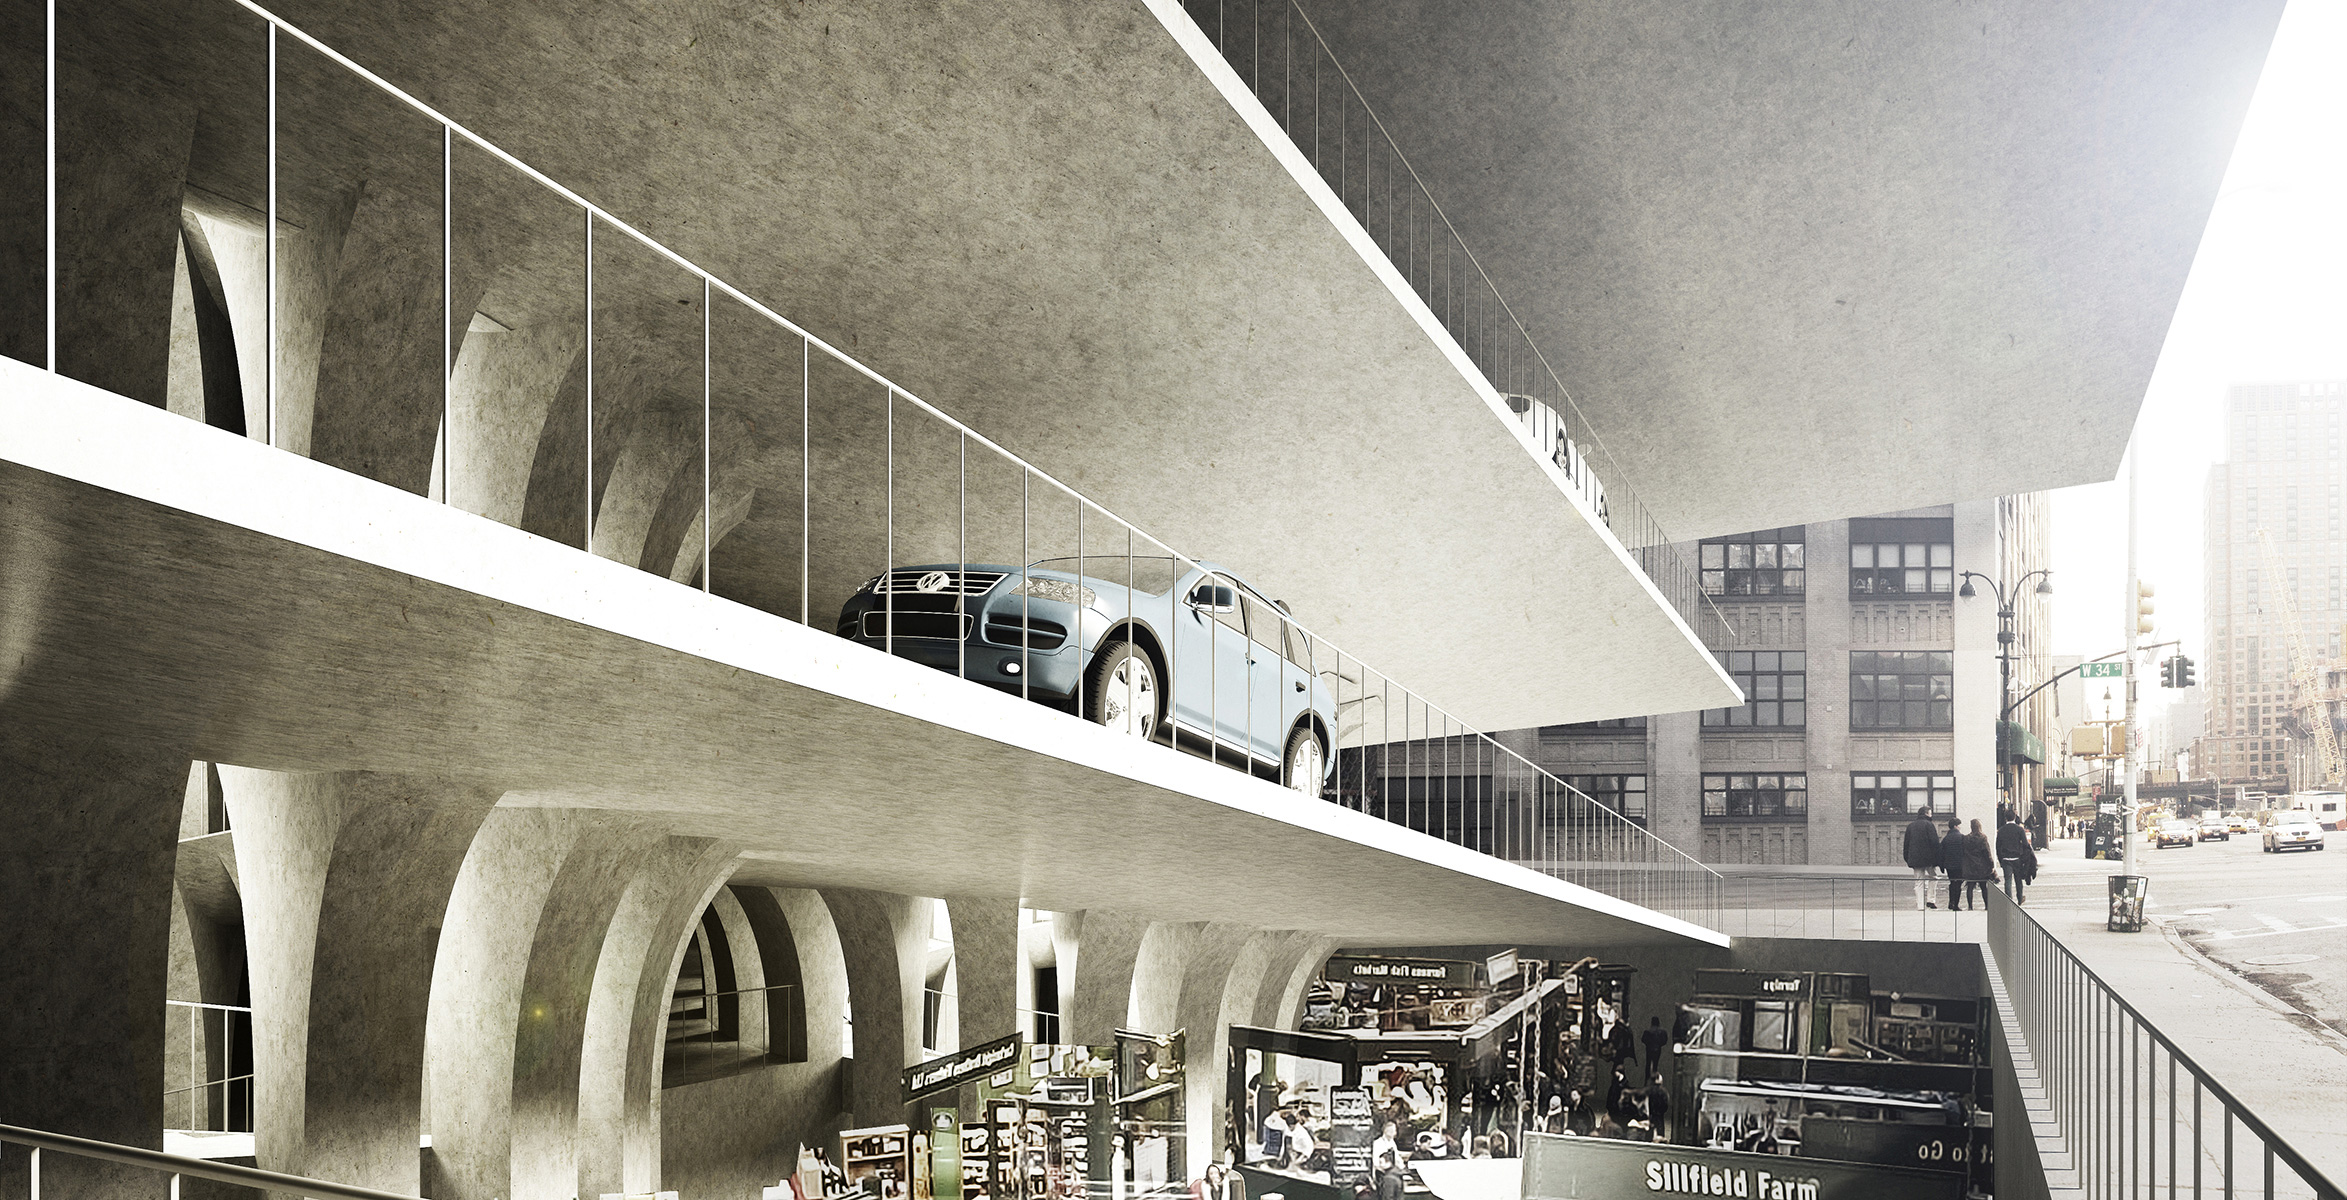 4 Carparks That You Wouldn’t Mind Getting Lost In